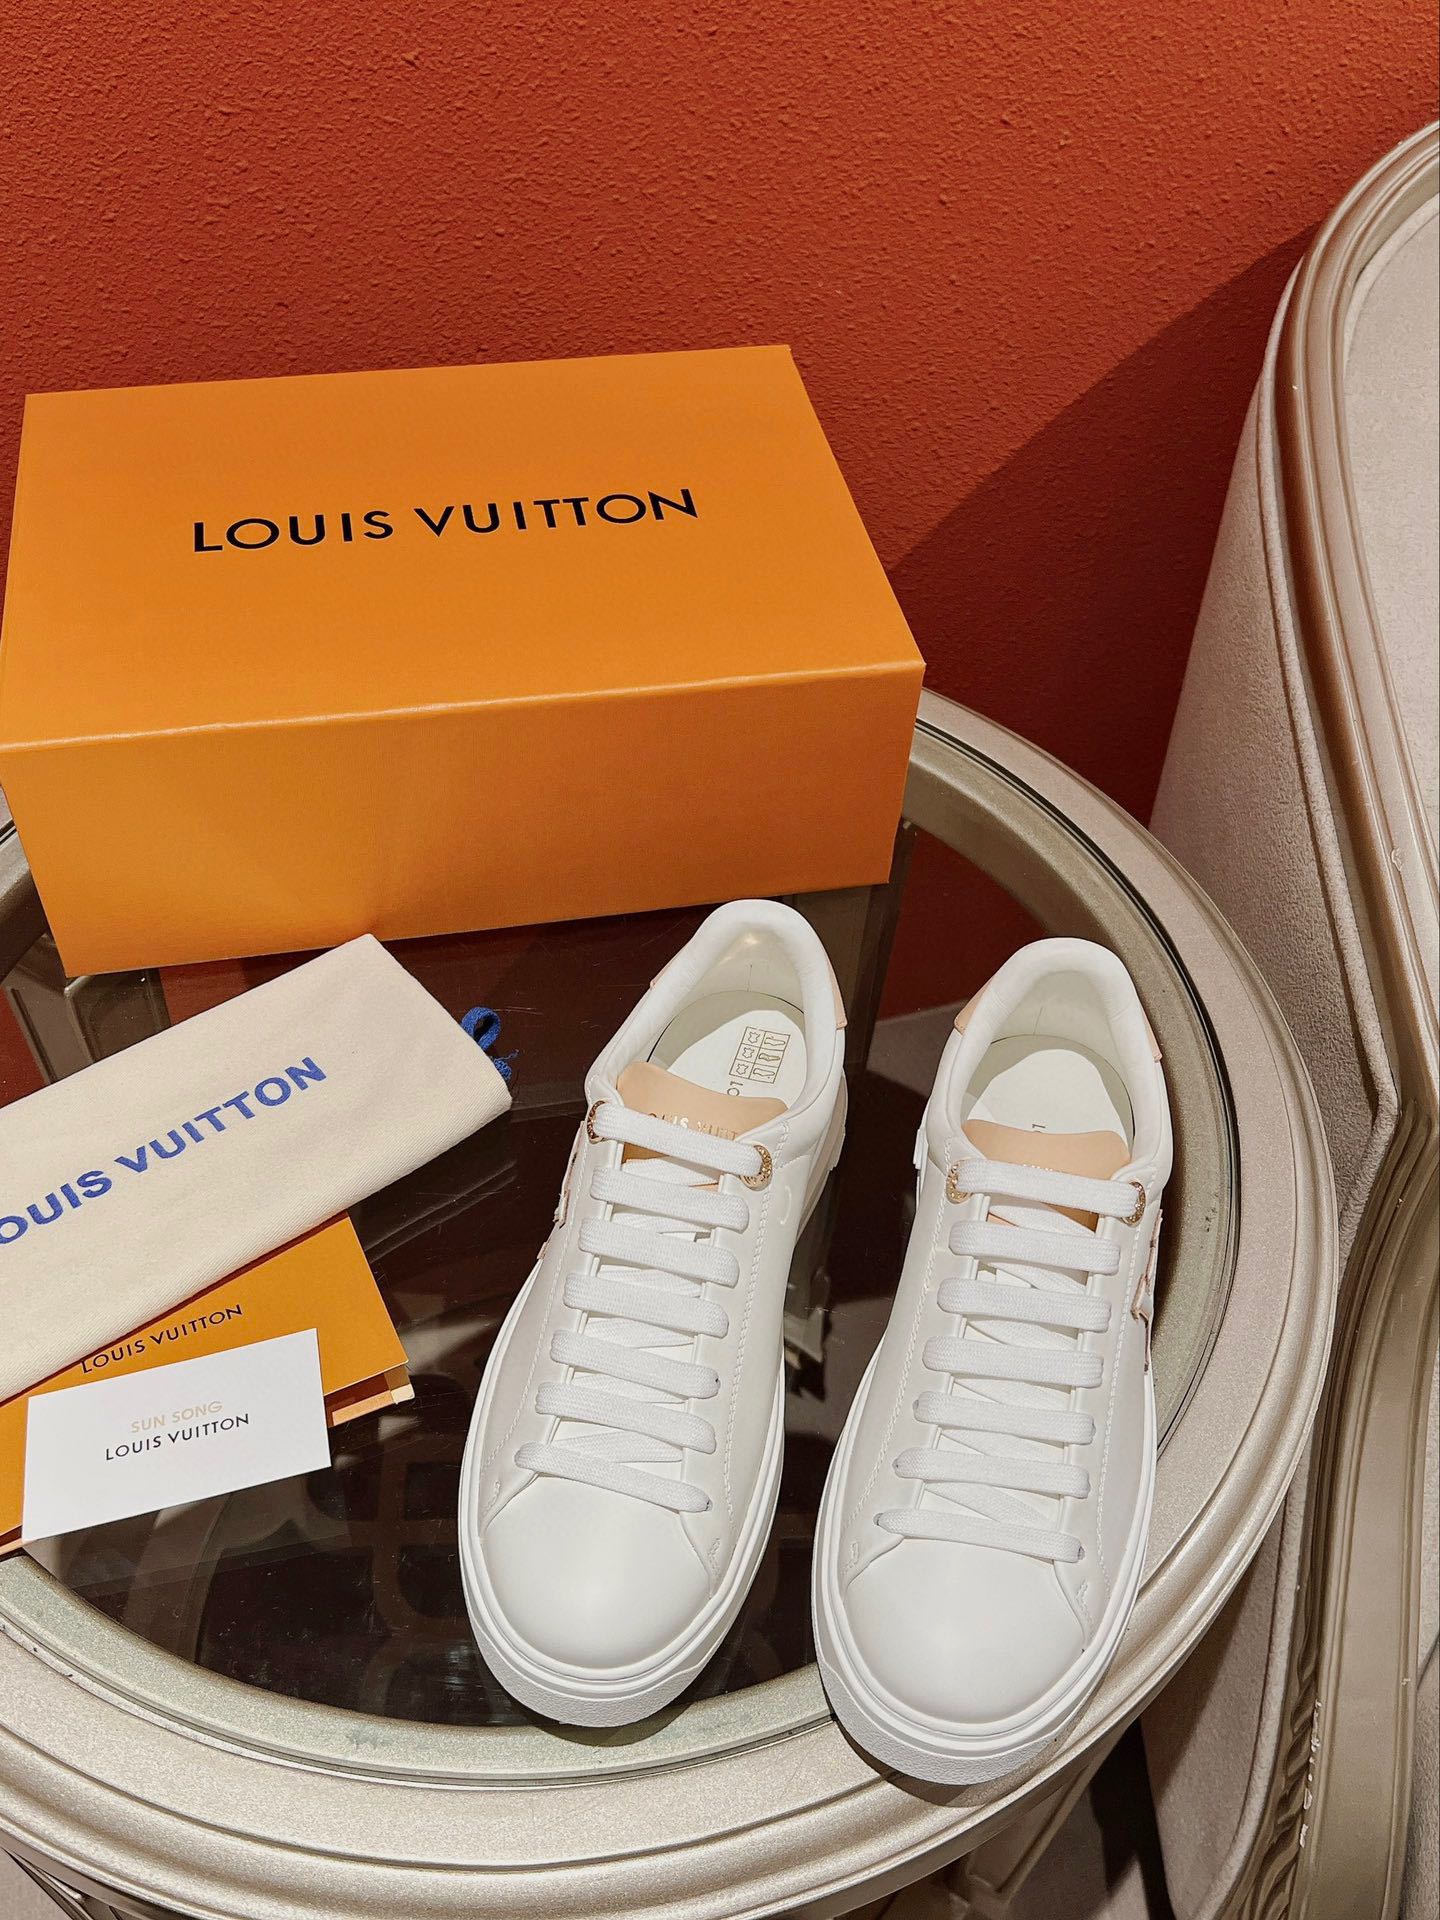 Louis Vuitton Skateboard Shoes Sneakers White Calfskin Cowhide Rubber TPU Spring/Summer Collection Fashion Sweatpants